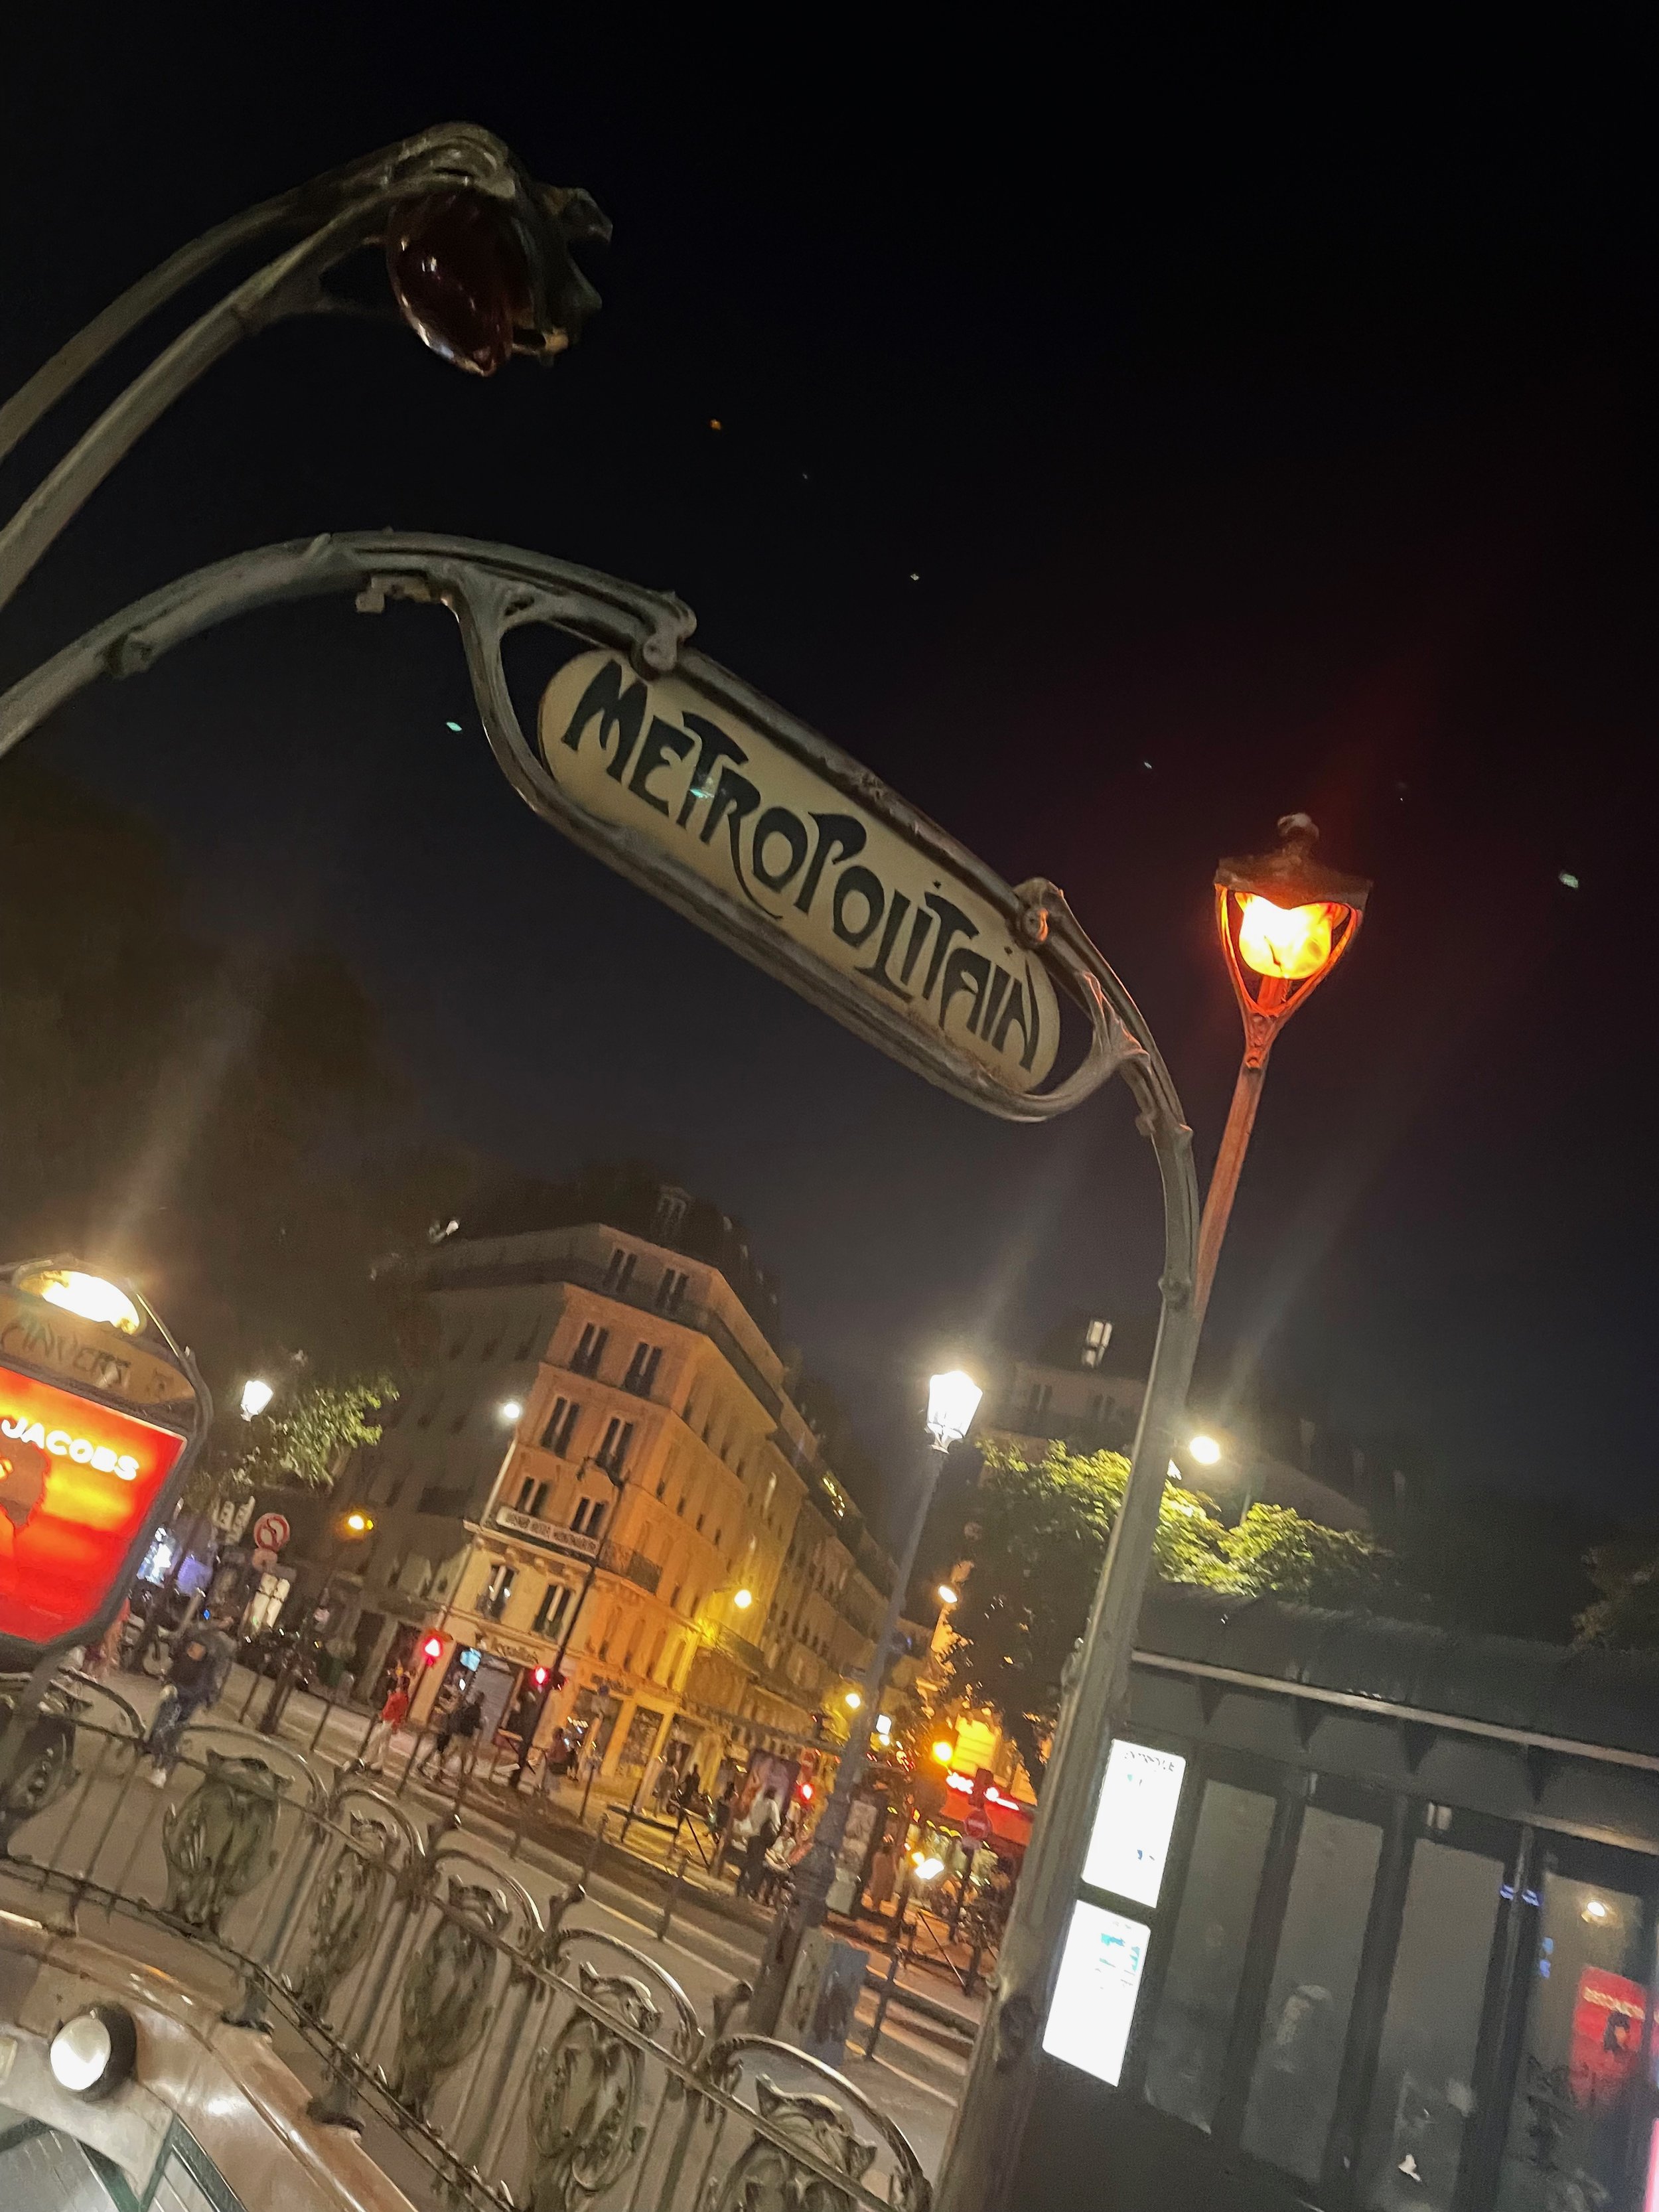  Image: An Art Nouveau style Metropolitain sign arches against a night sky, with buildings in the background. 